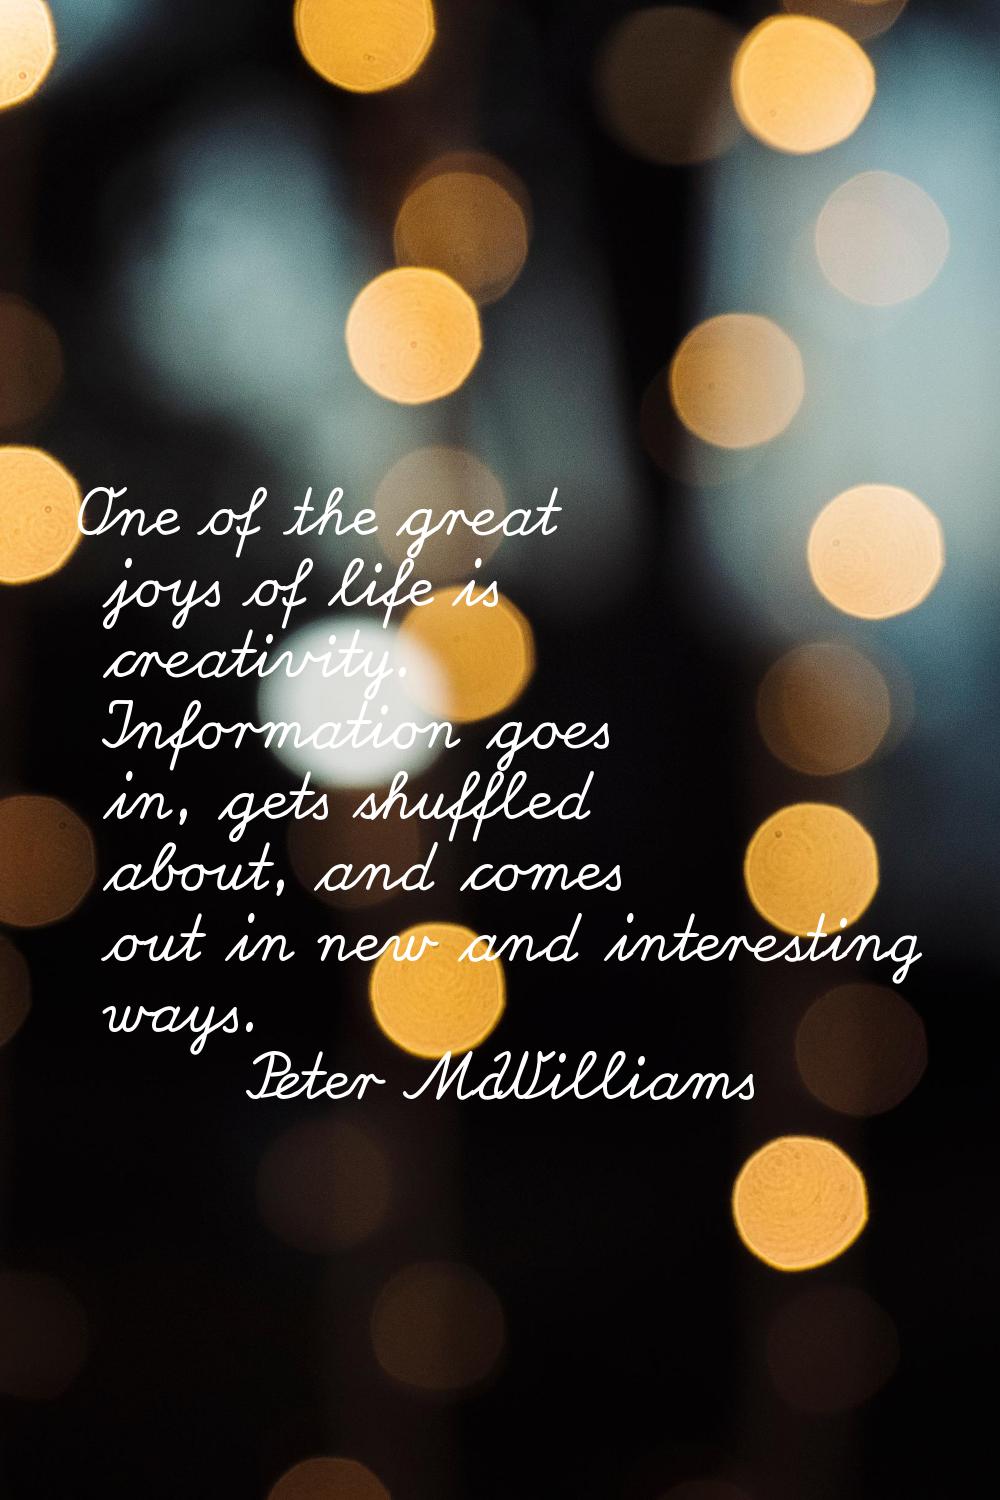 One of the great joys of life is creativity. Information goes in, gets shuffled about, and comes ou